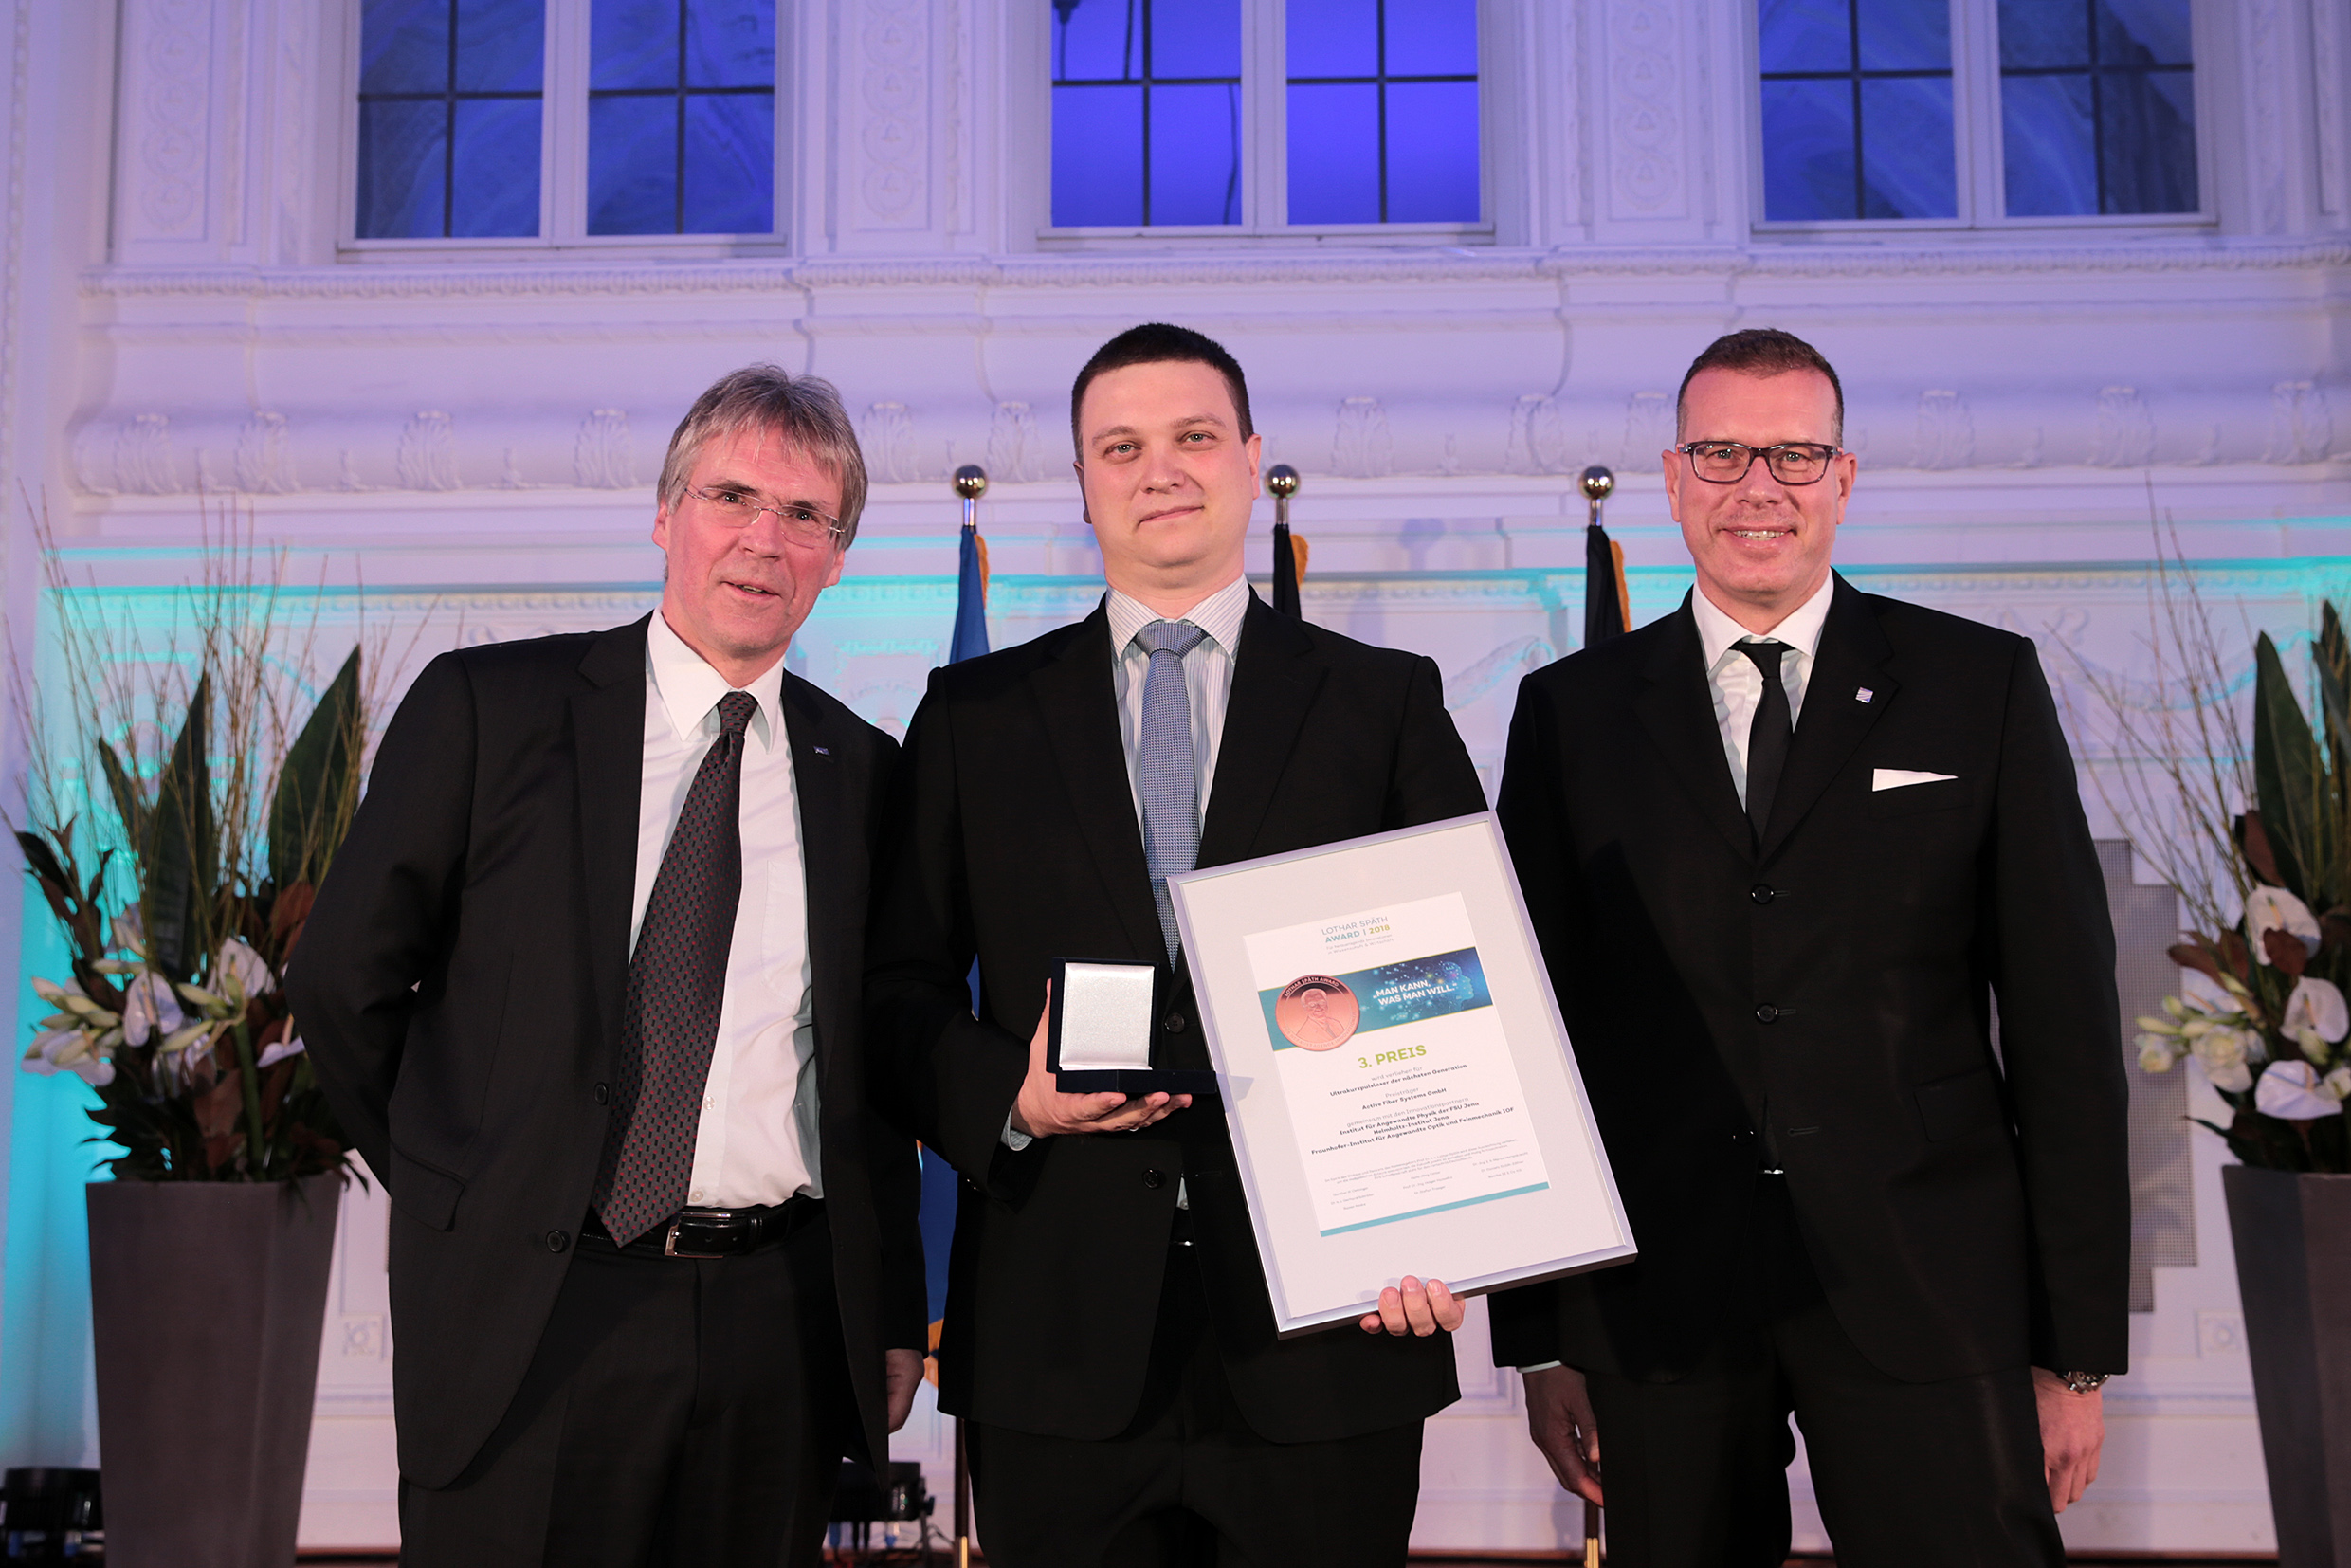  Company founders with the necessary &quot;entrepreneurial gene&quot;: One example is the spin-off Active Fiber Systems GmbH, which was awarded the Lothar Späth Award in 2008 in cooperation with partners from Jena. The award was presented by Holger Hanselka (left), now president of the Fraunhofer-Gesellschaft.